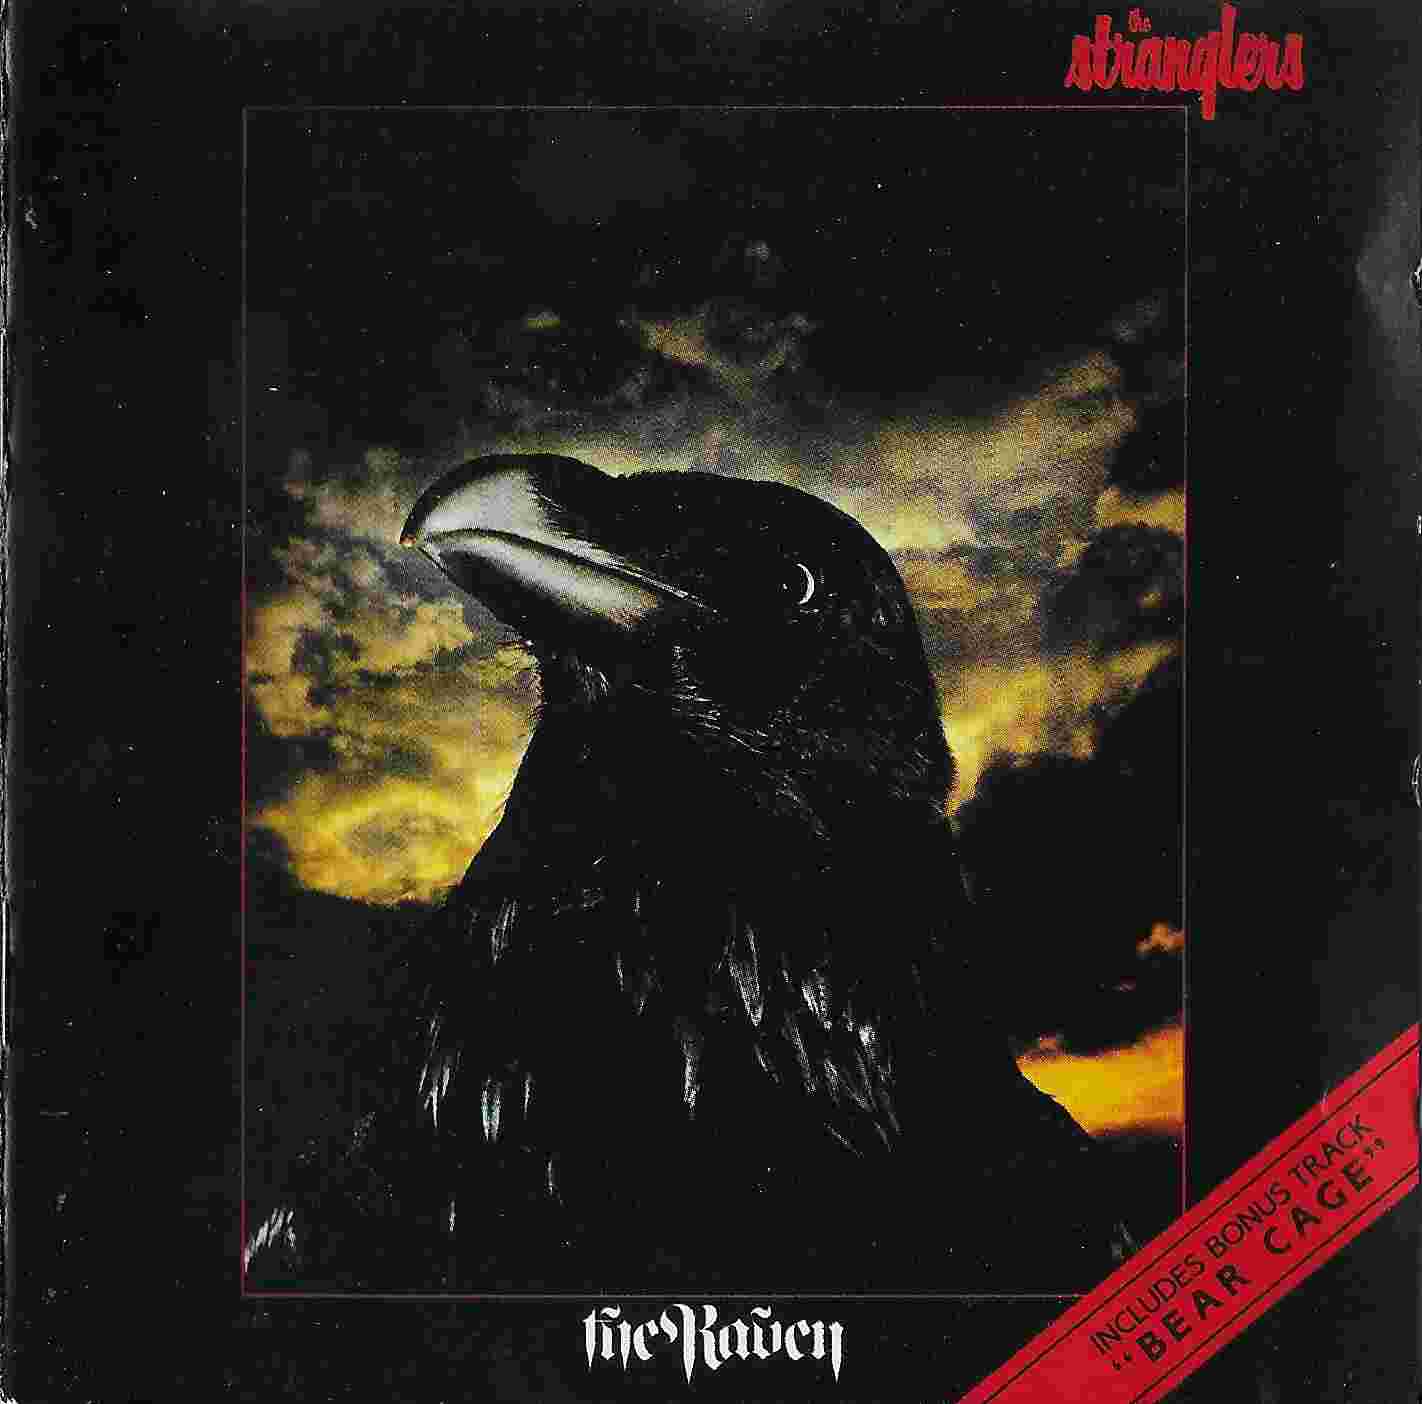 Picture of CDP 746615 2 The raven by artist The Stranglers from The Stranglers cds